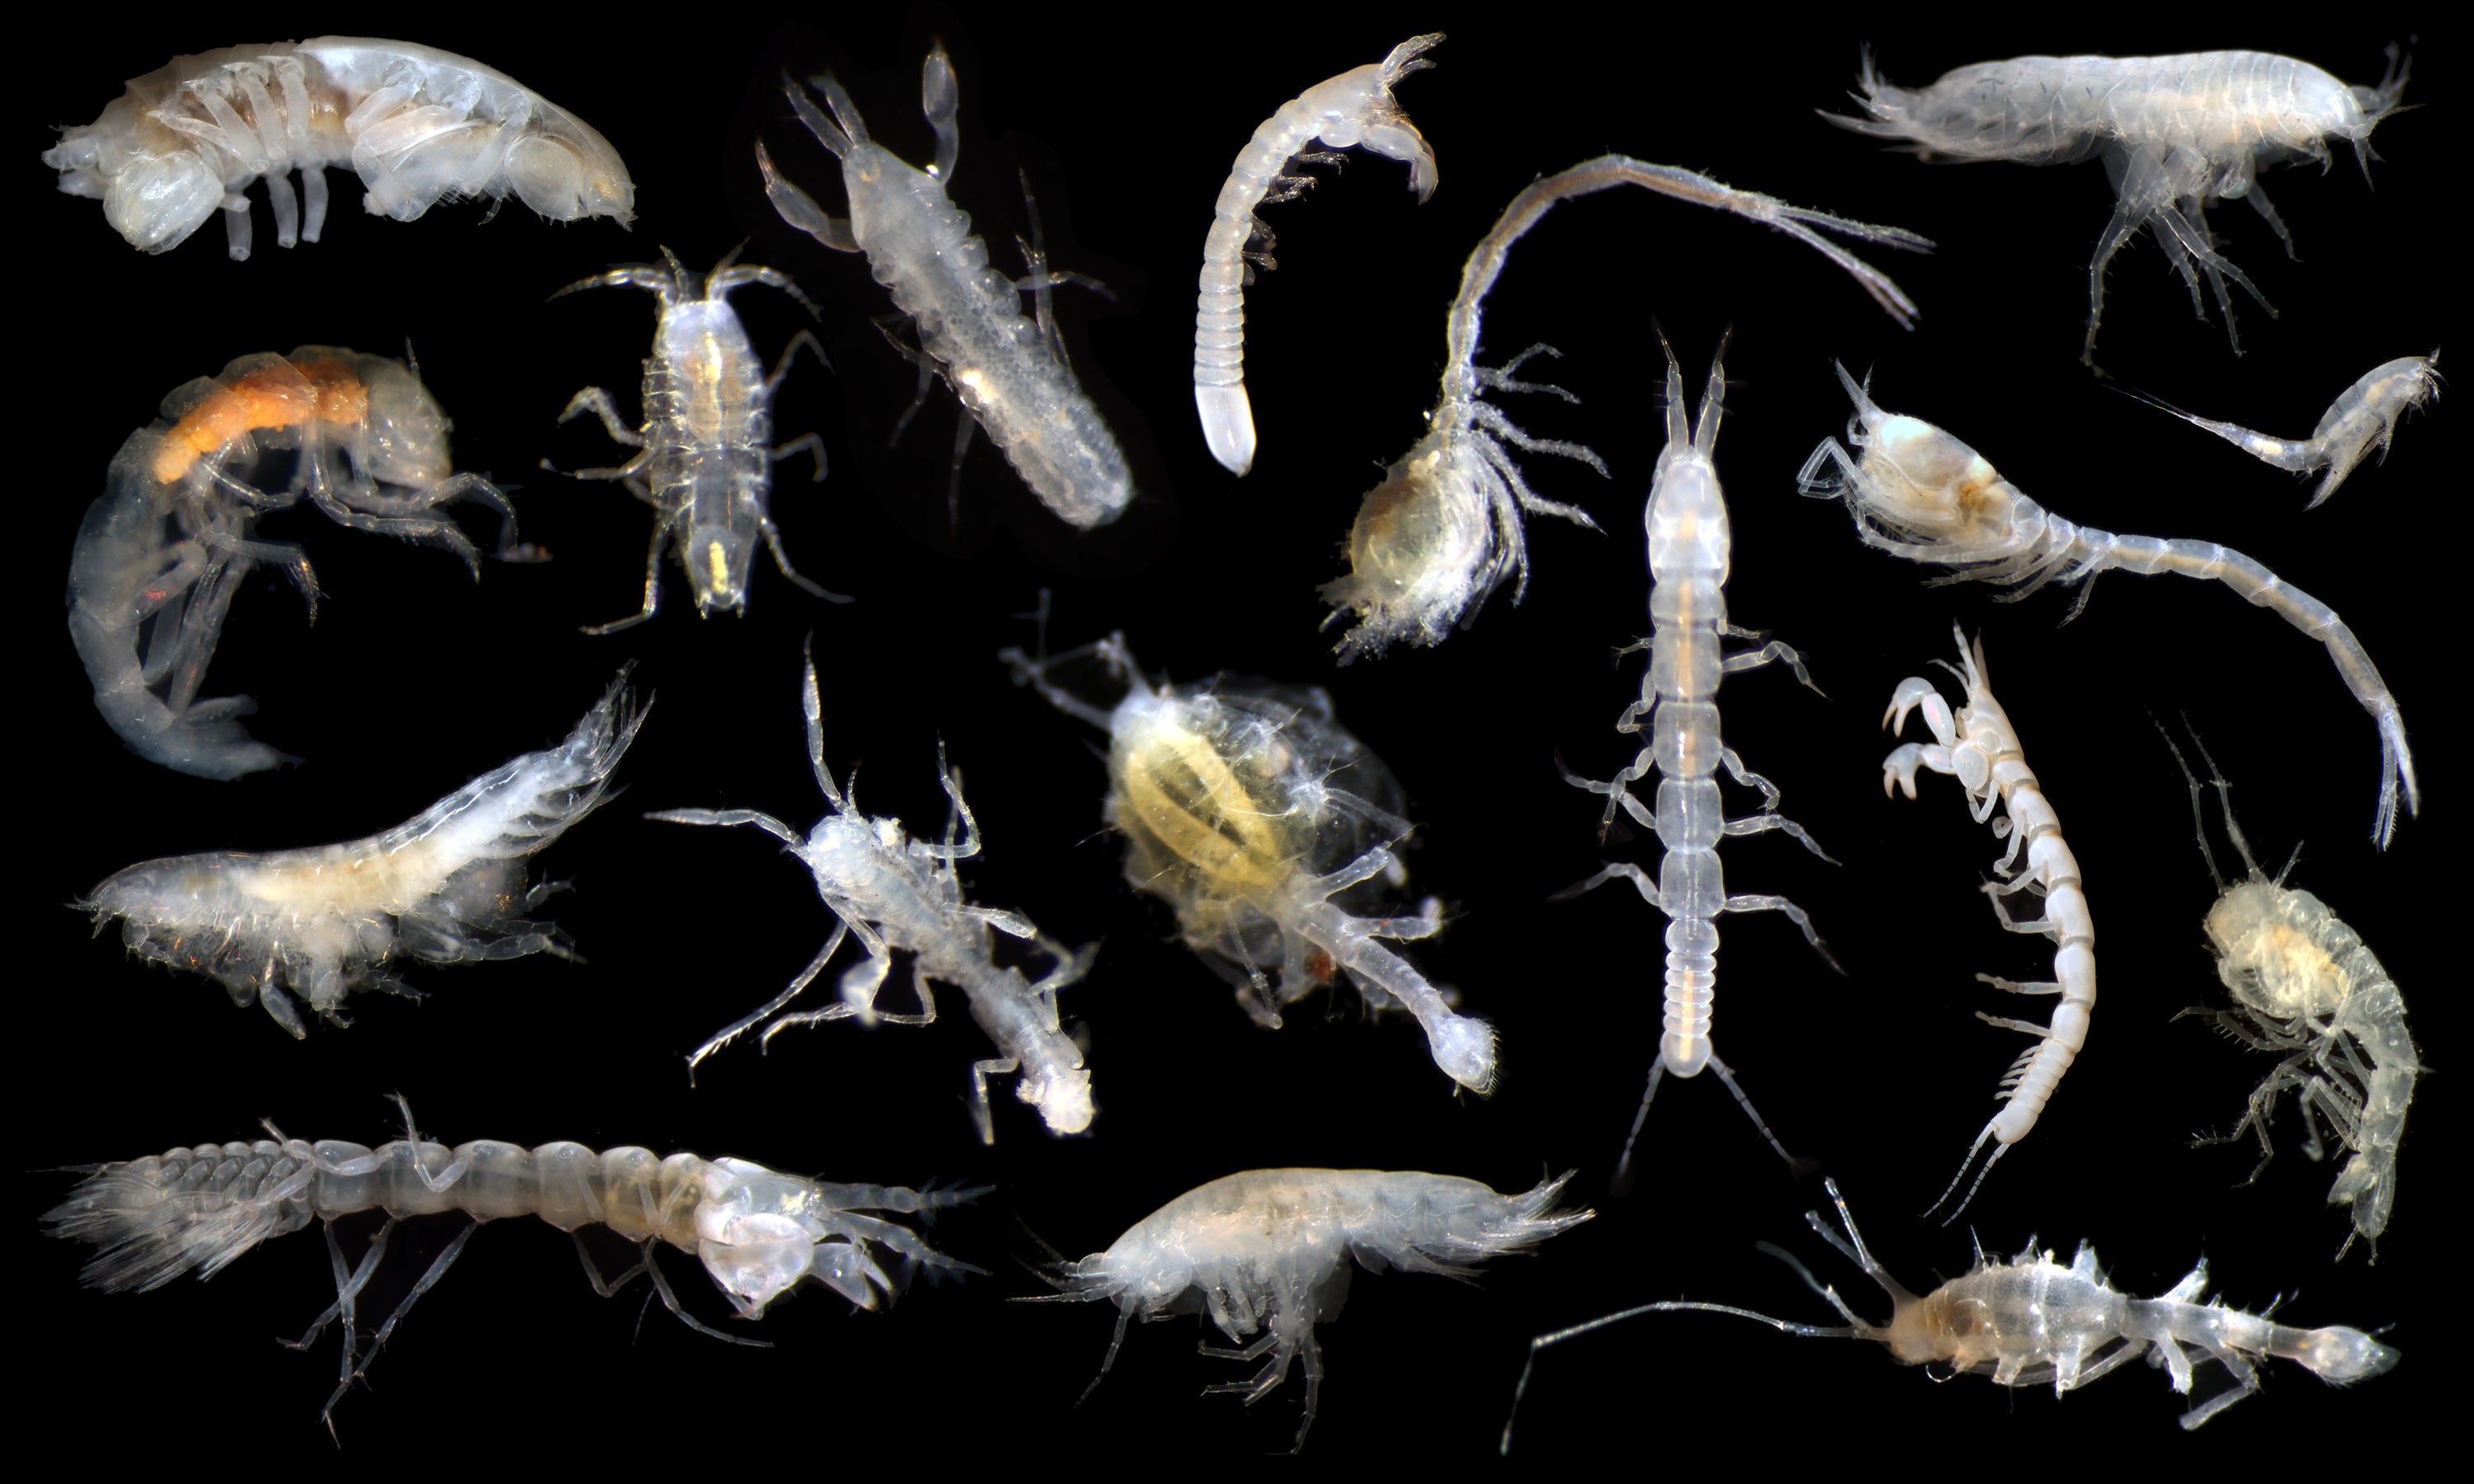 Multiple unidentified marine arthropods (Photo: SMARTEX Project, Natural Environment Research Council, UK smartexccz.org)